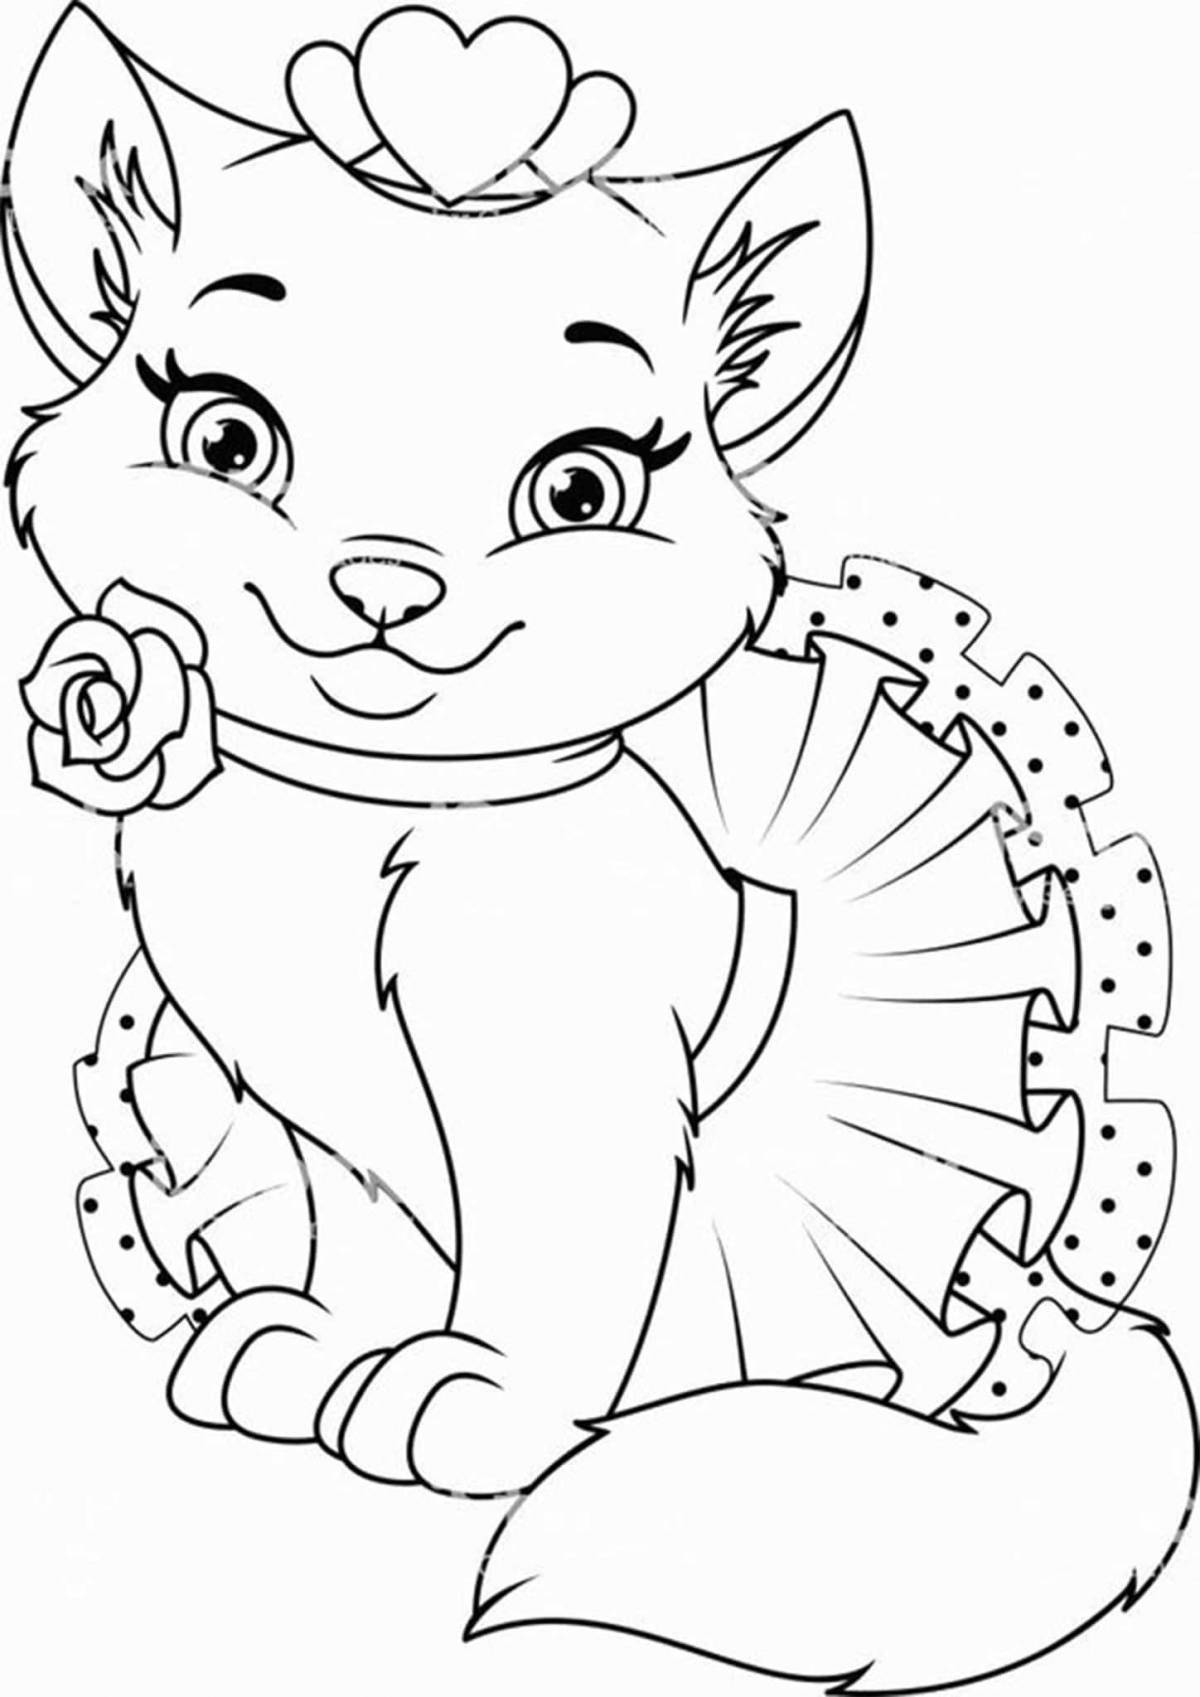 Amazing lily kitty coloring page